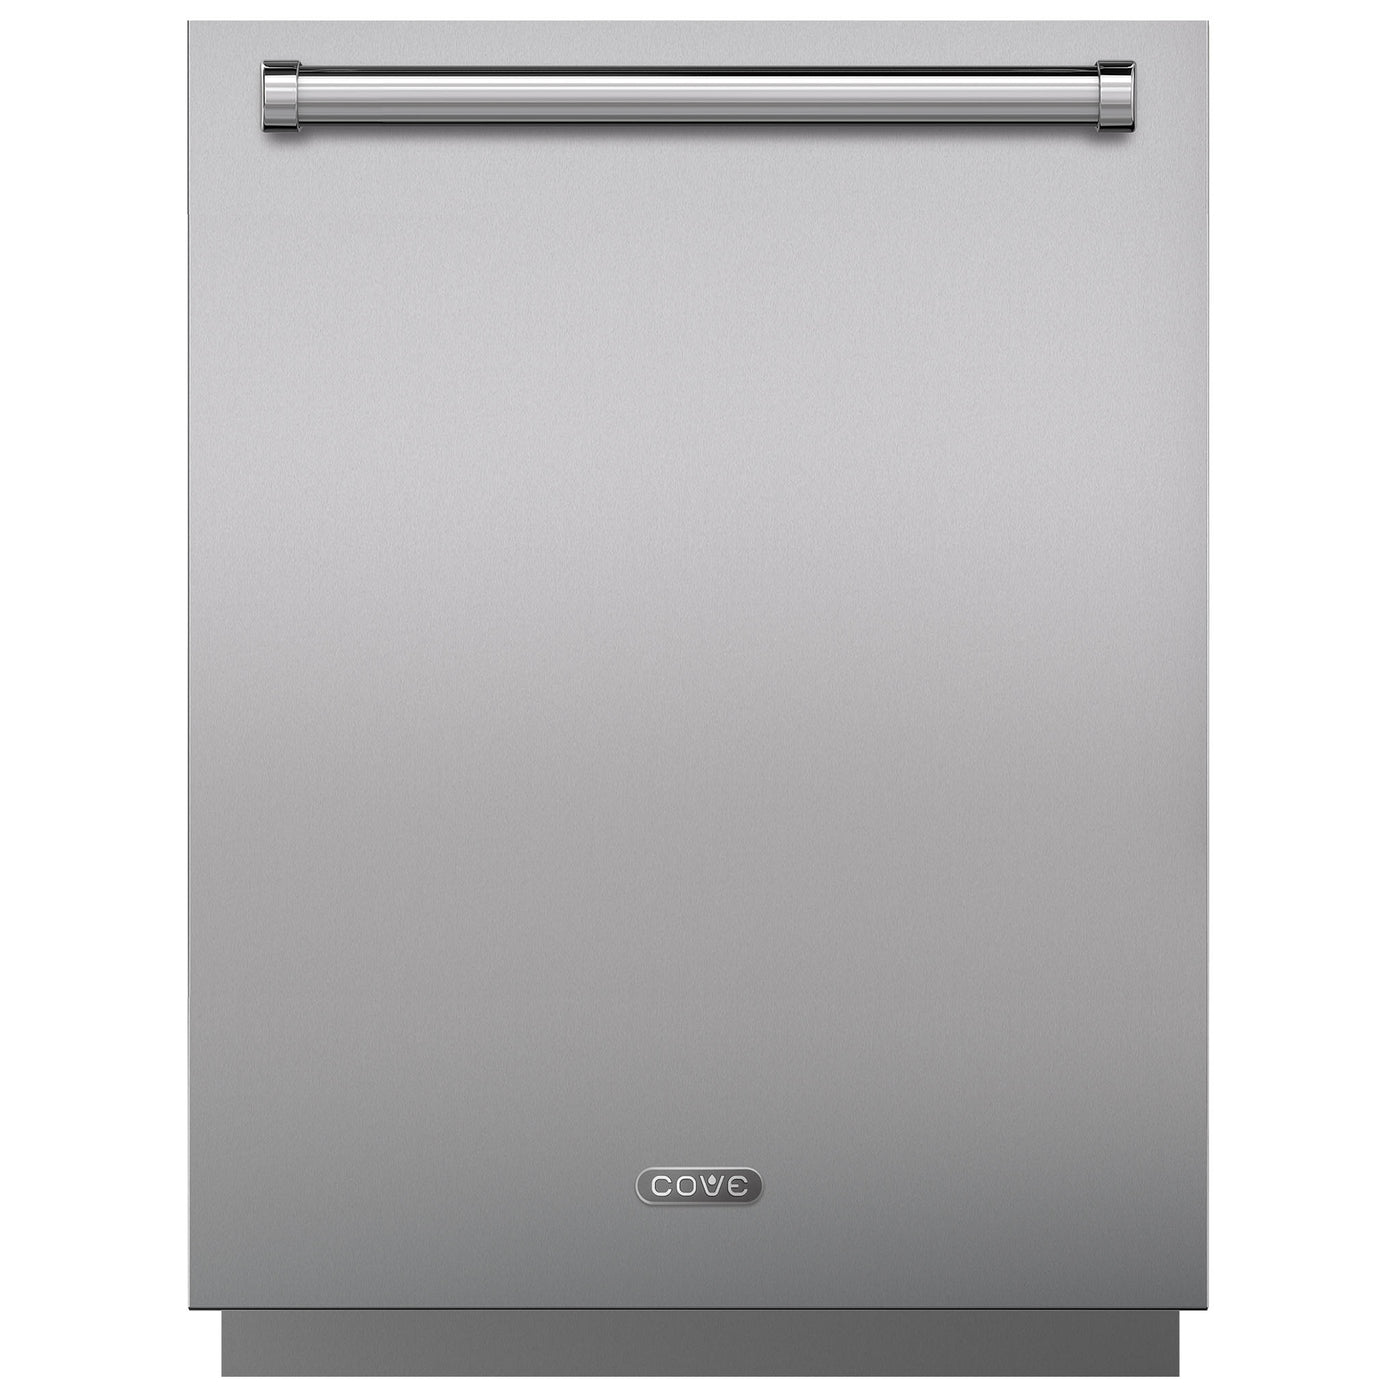 24" Dishwasher with Water Softener - Panel Ready